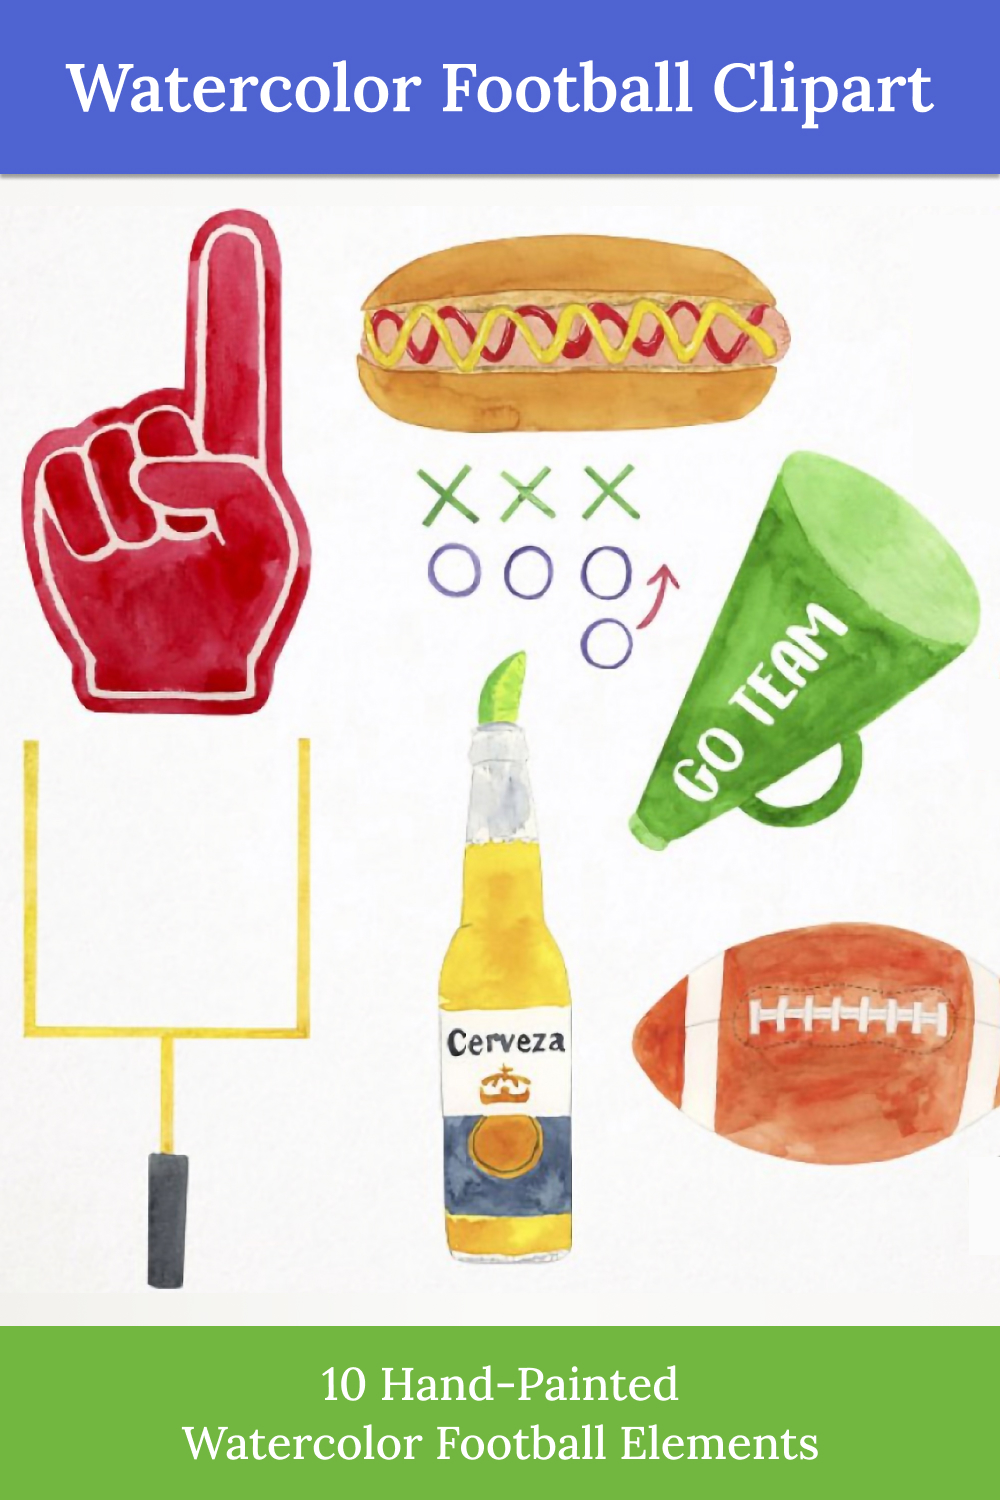 Watercolor football clipart of pinterest.